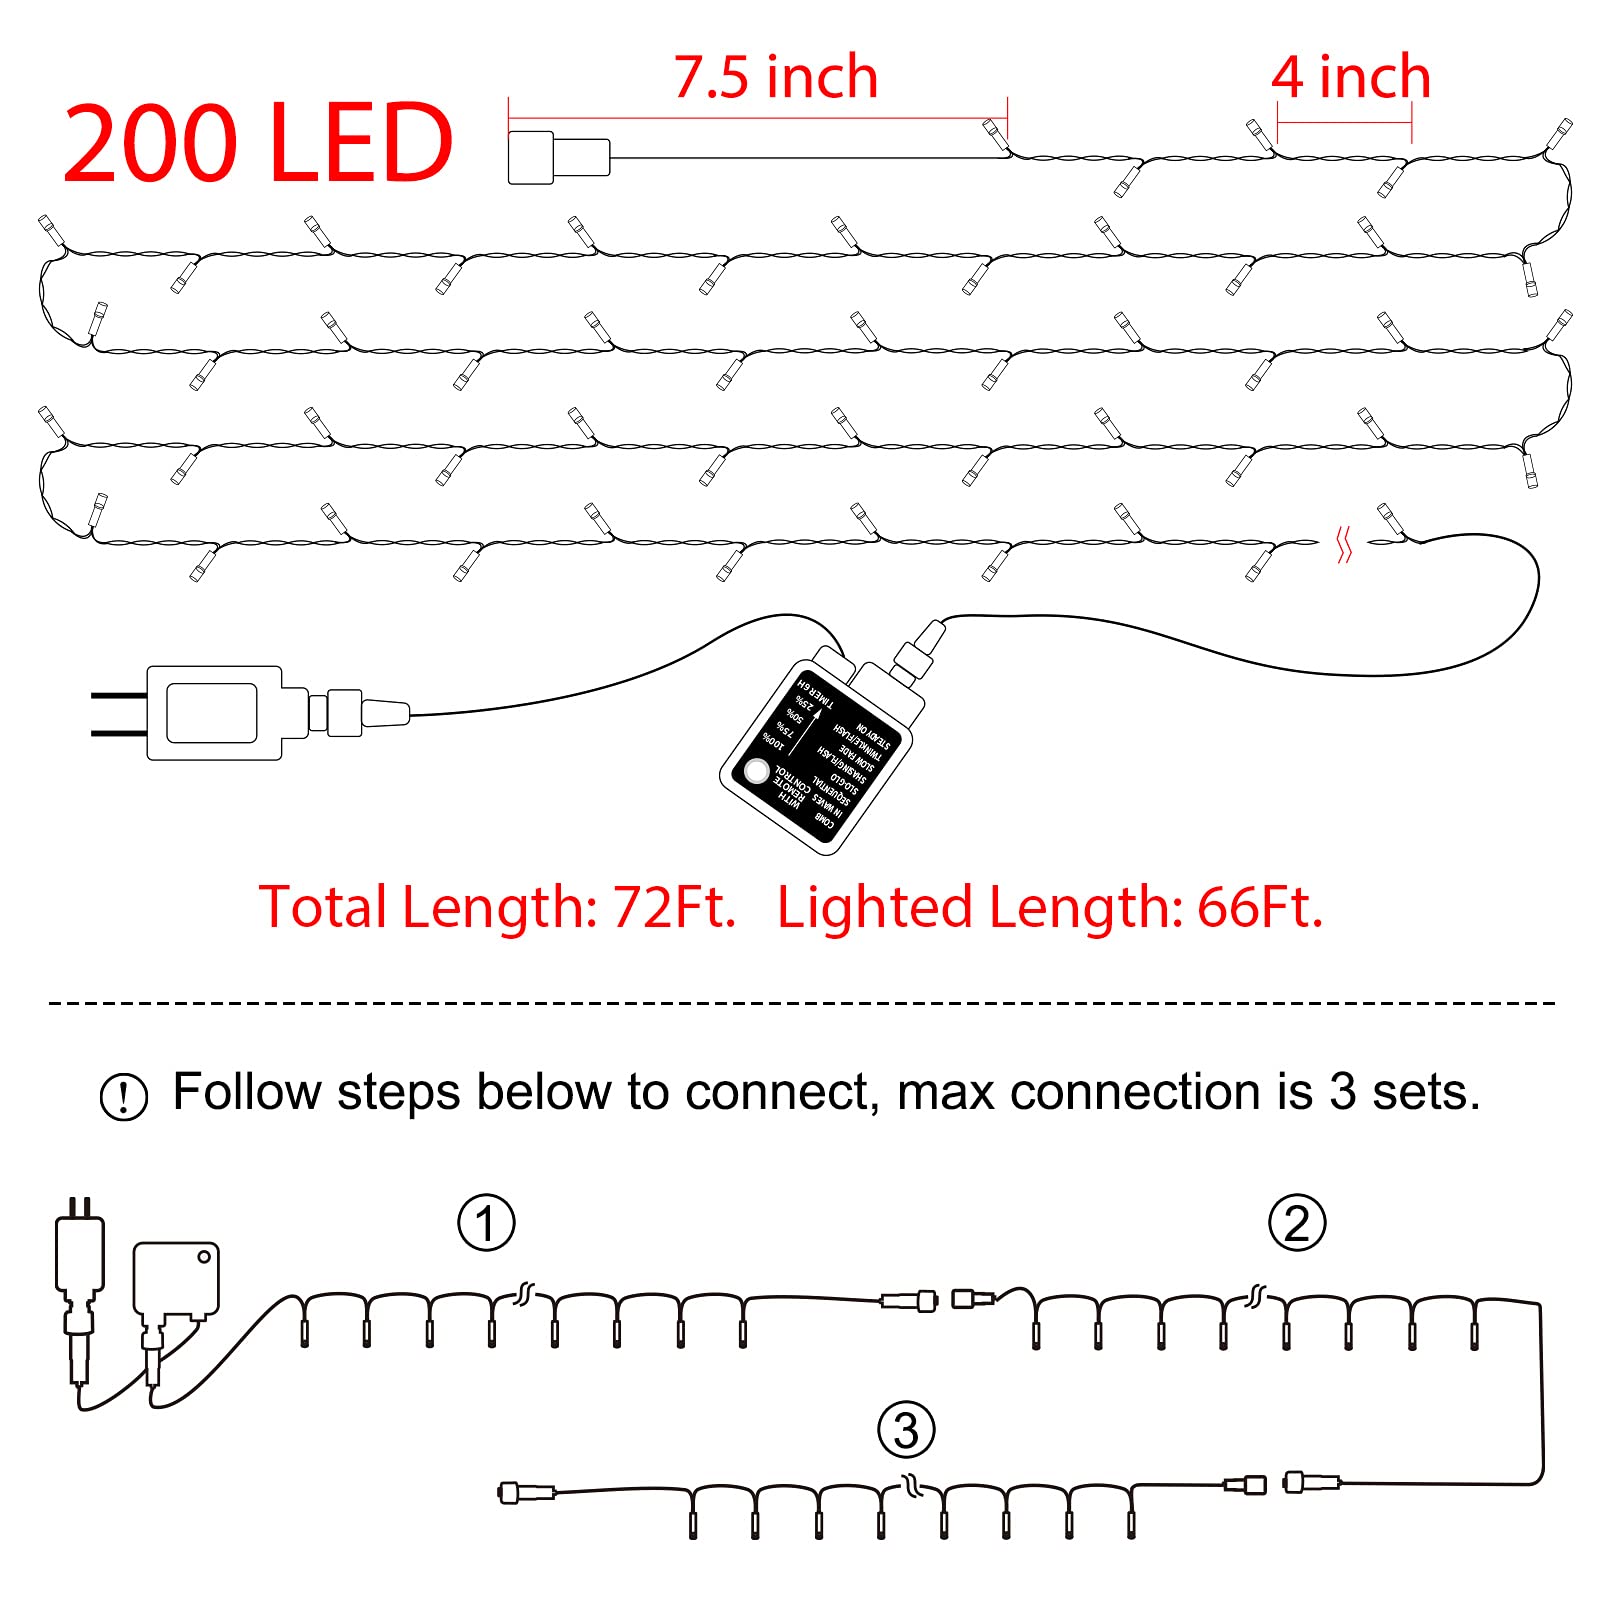 66 Feet / 200 LED / Pure White / Green Wire